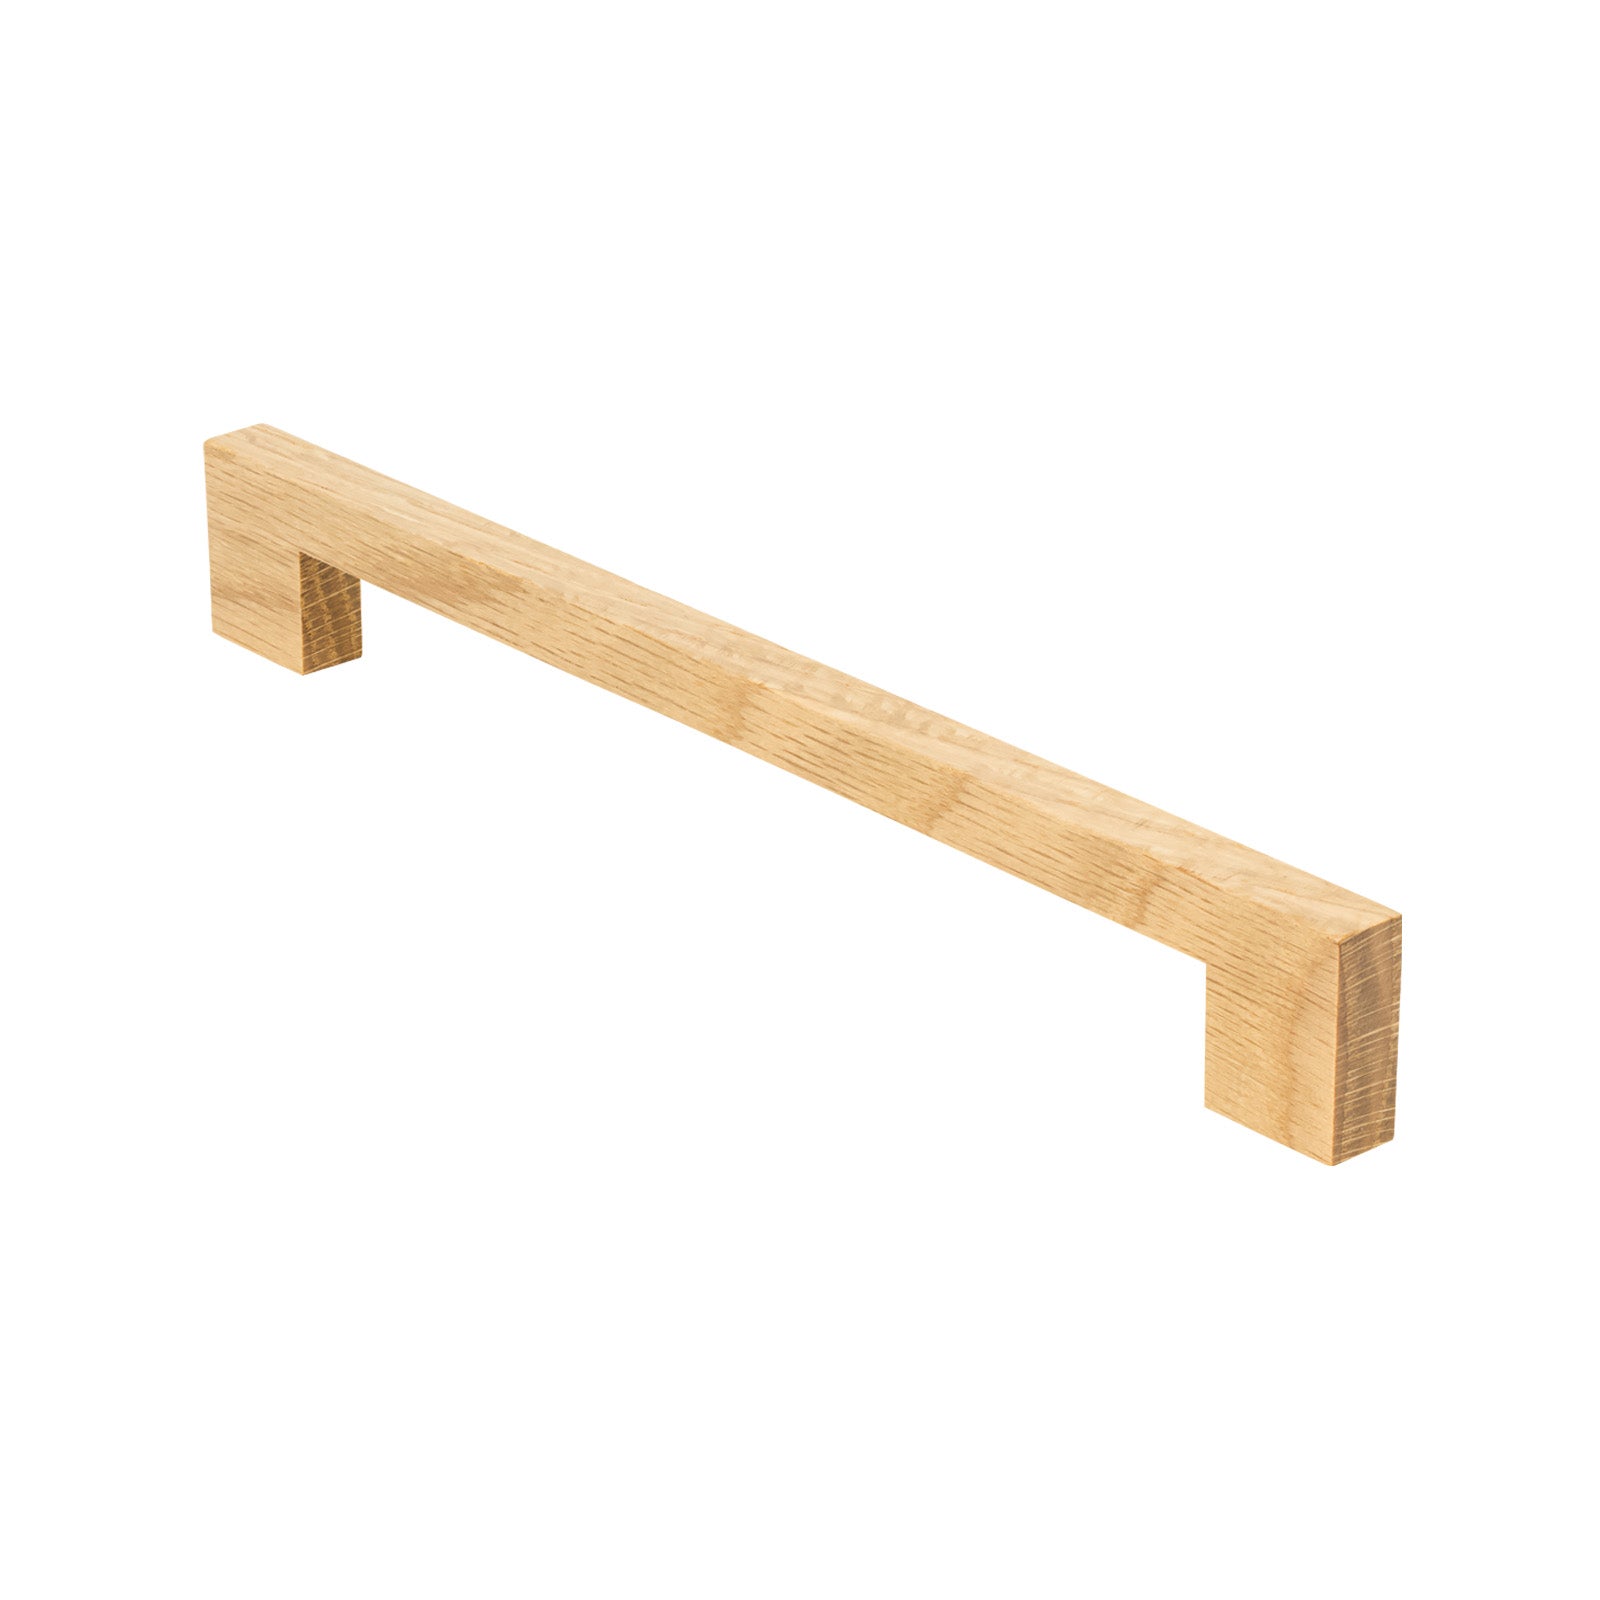 SHOW 224mm Metro Cabinet Pull Handle In Oak Finish